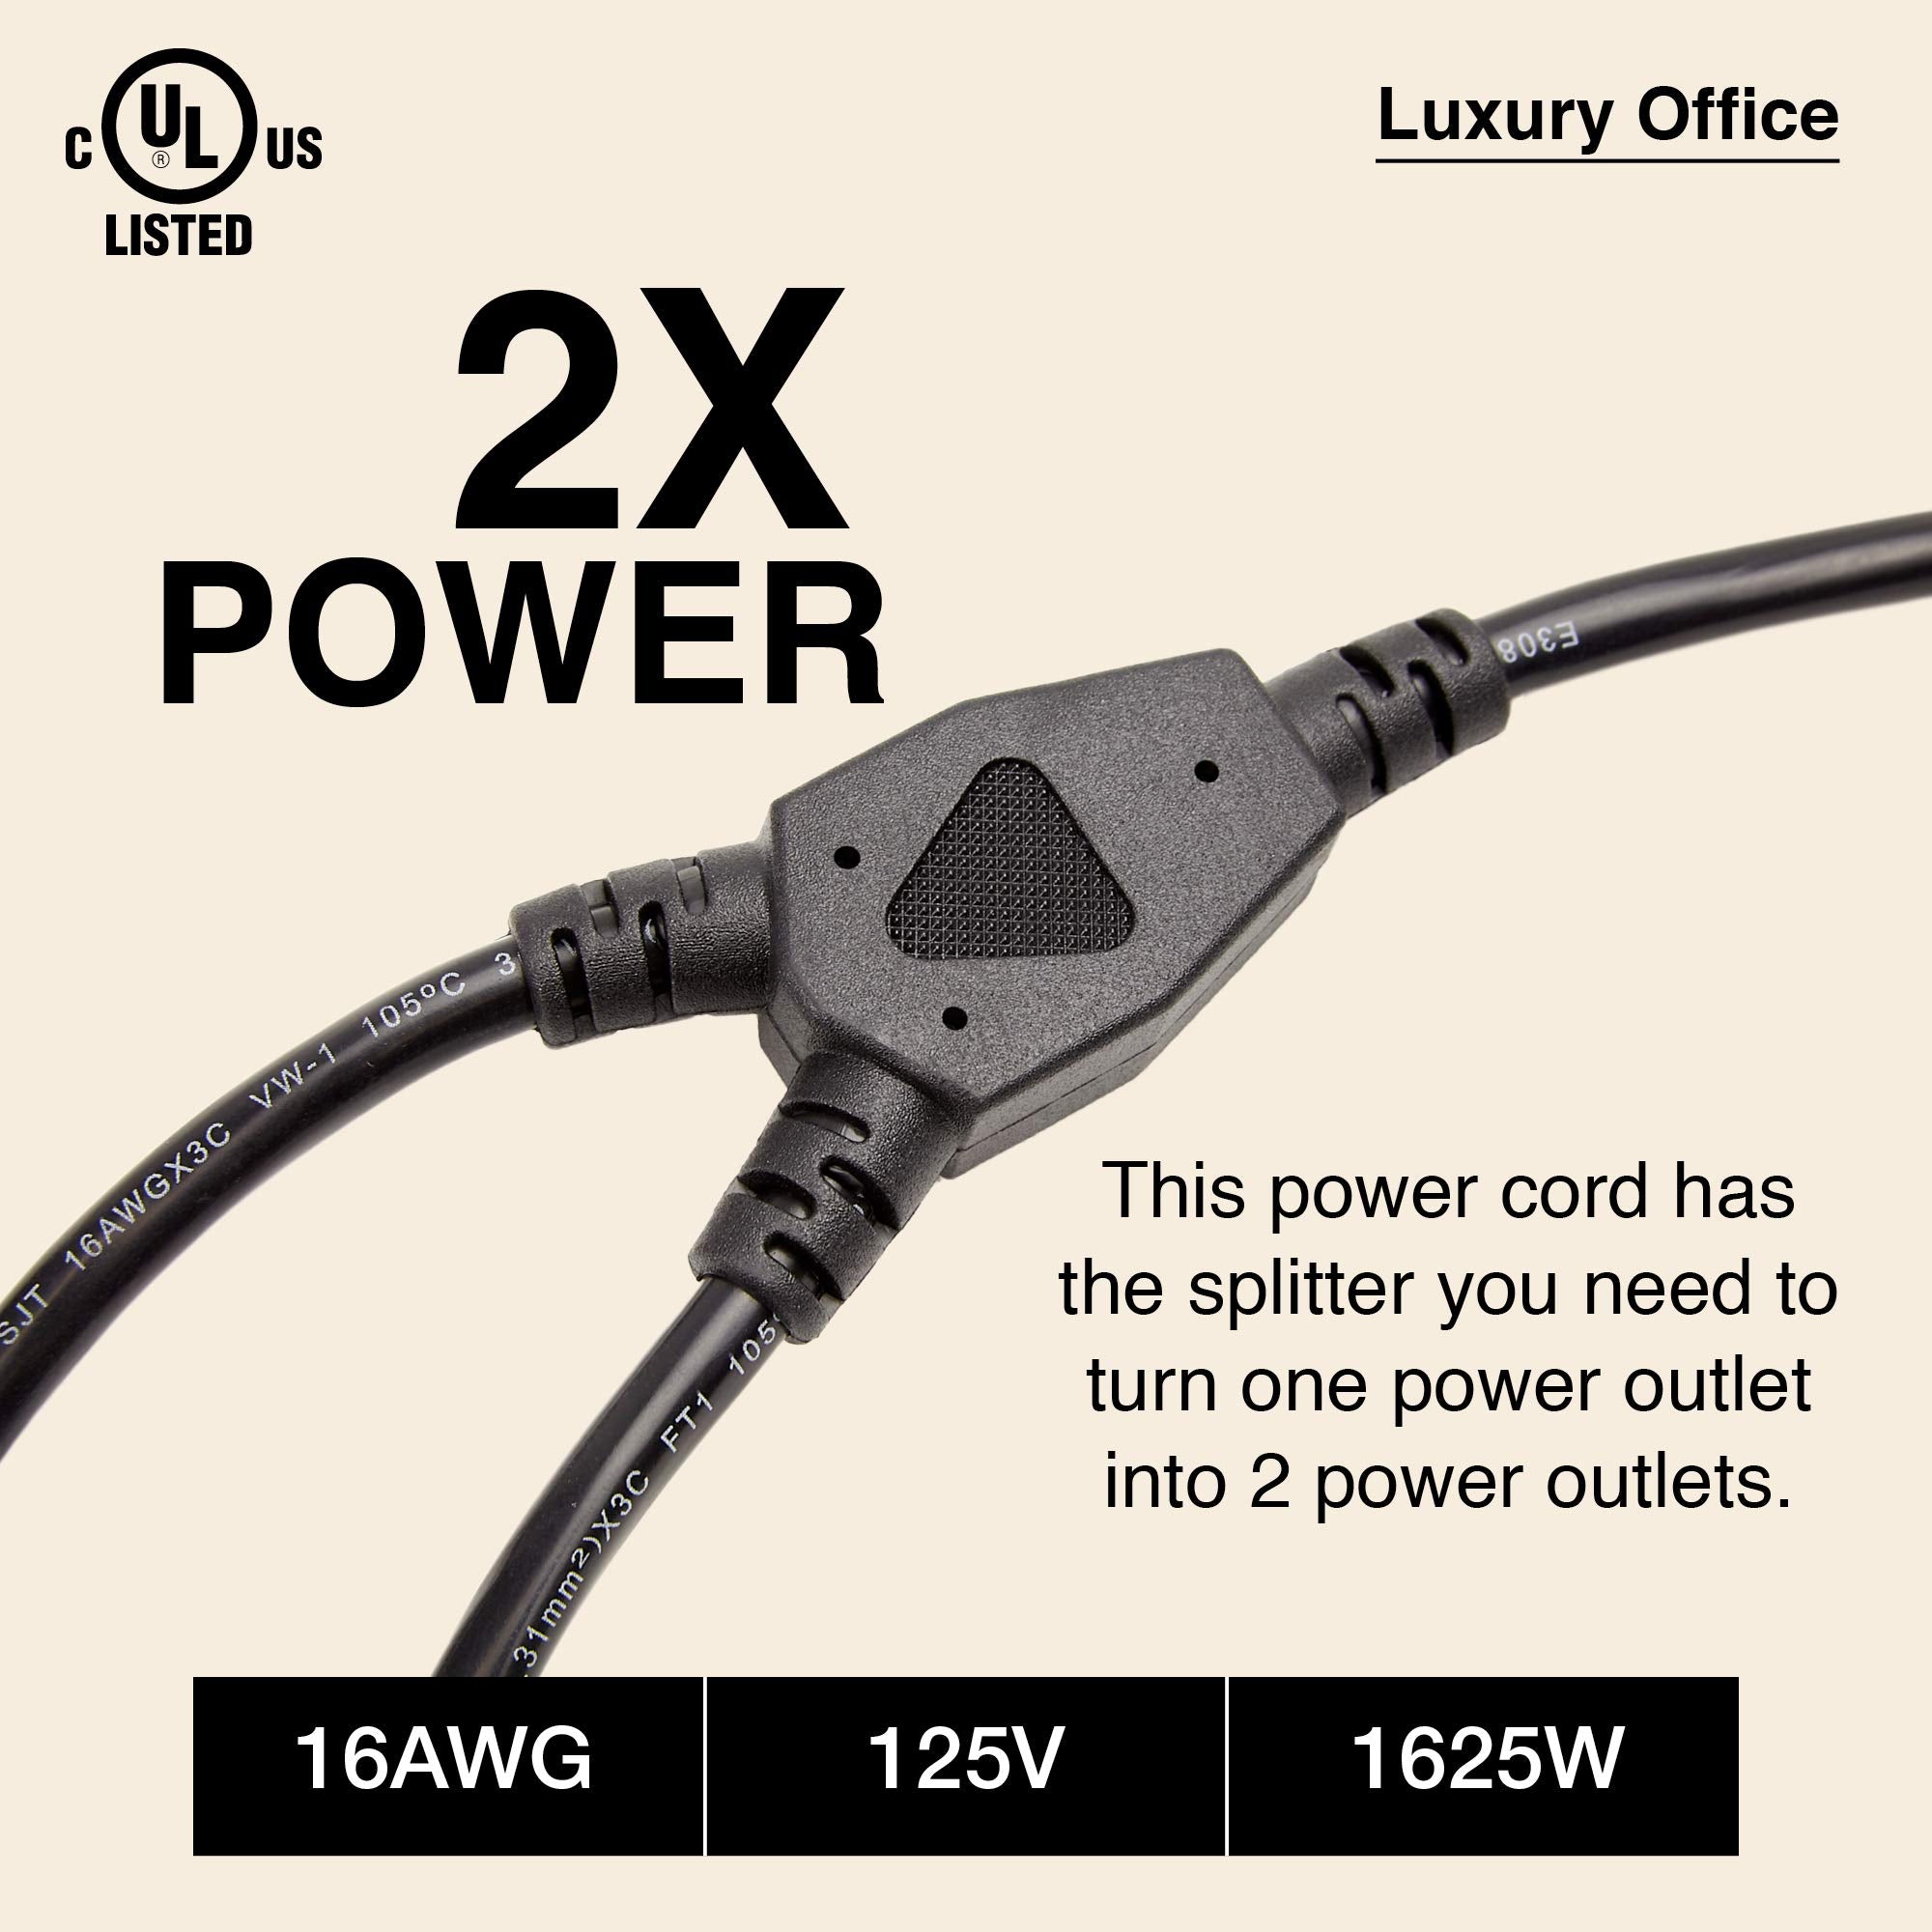 2 Way Power Splitter and 1' Extension Cord - 1 to 2 Cable Strip with 3 Pronged Outlet and Y Style Extension Cord – Black - SJT 16 AWG – by Luxury Office  - Like New